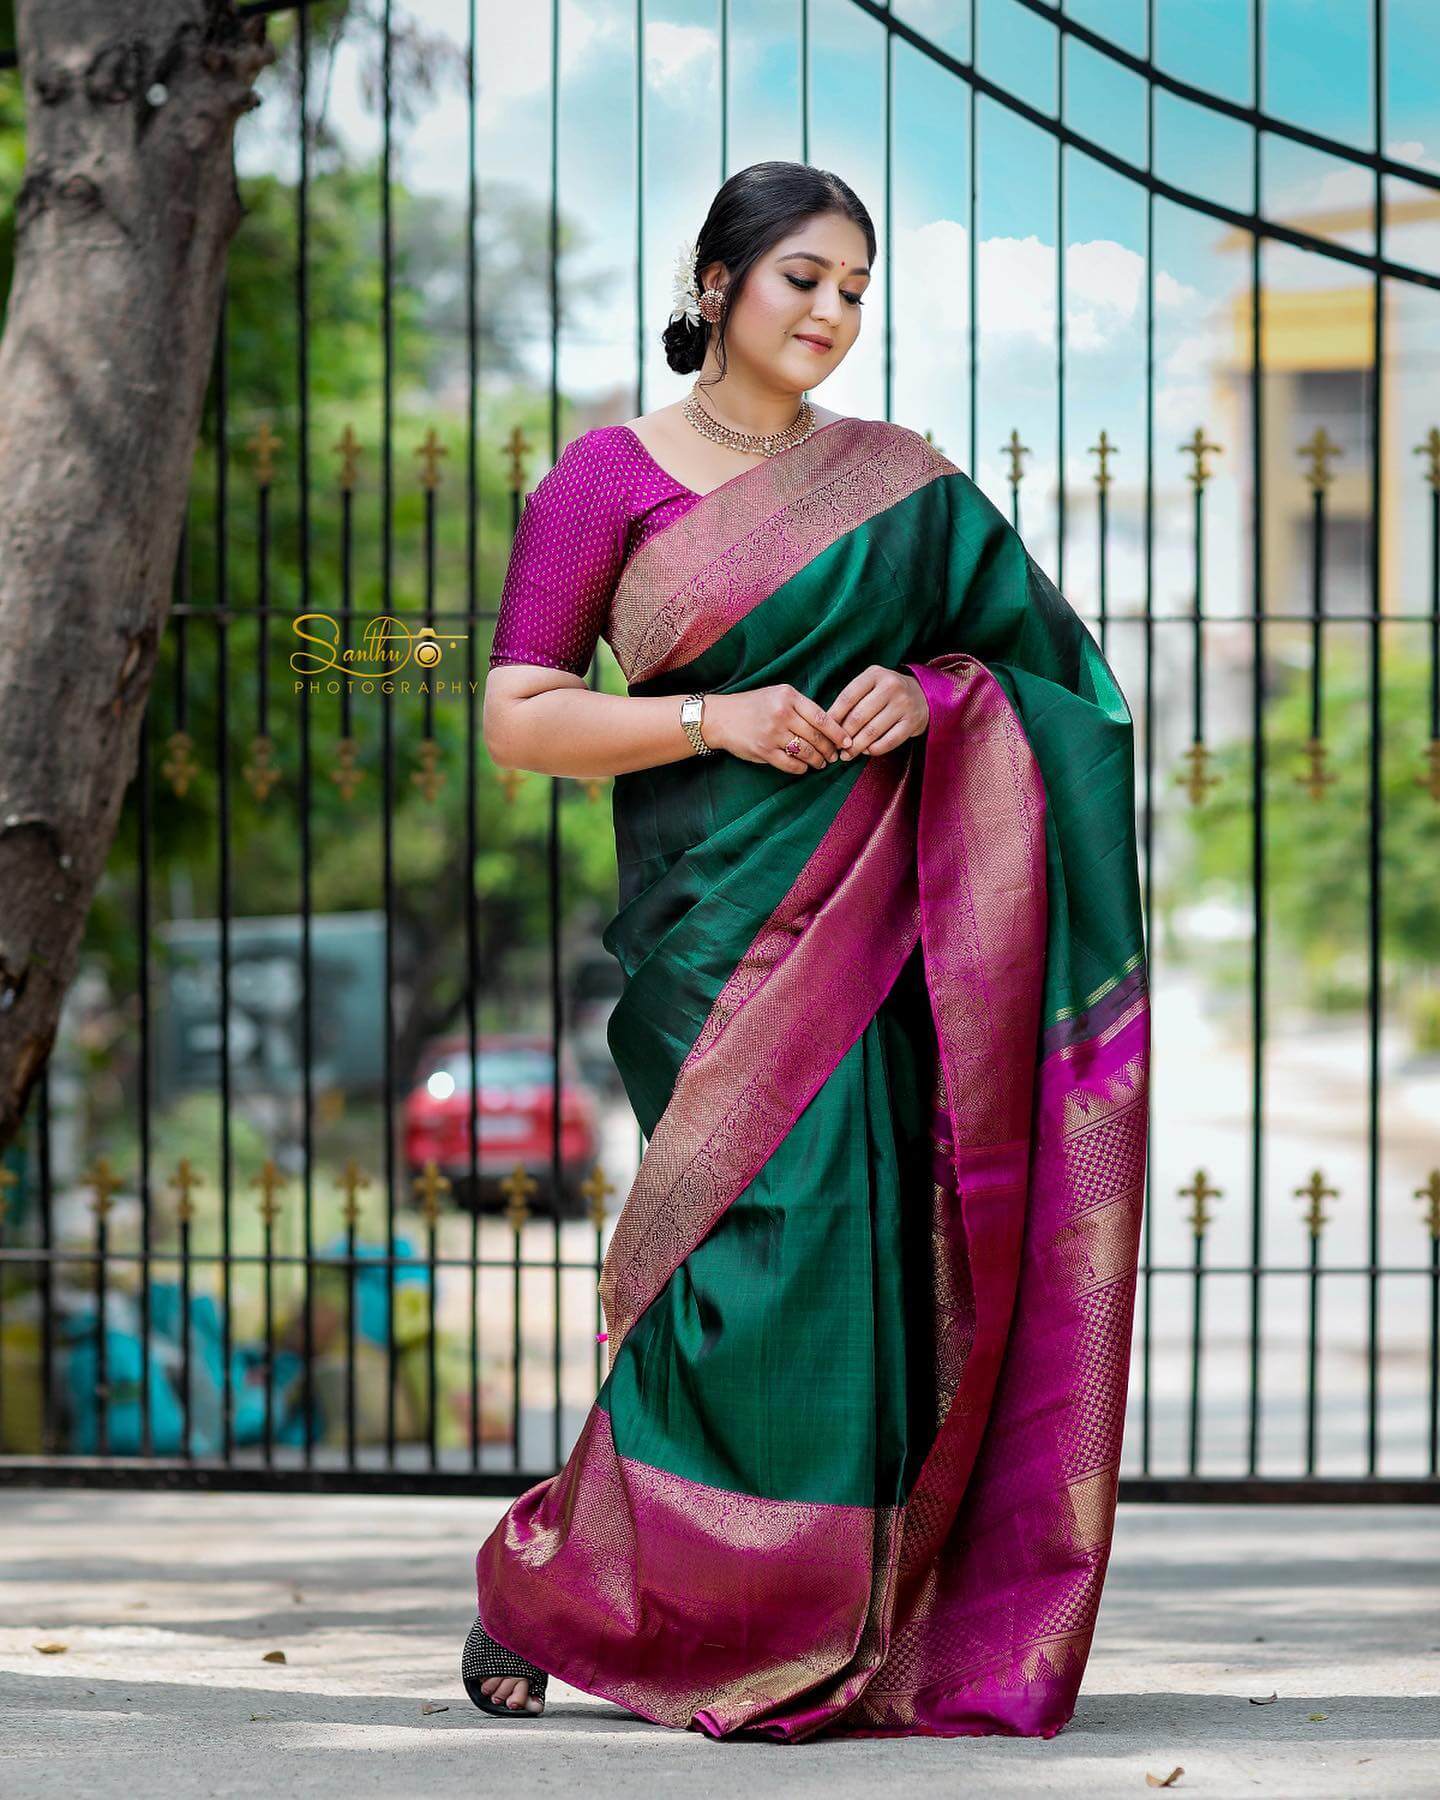 Meghana Raj Mesmerizing Look In Green & Pink Silk Saree Paired With Pink Blouse